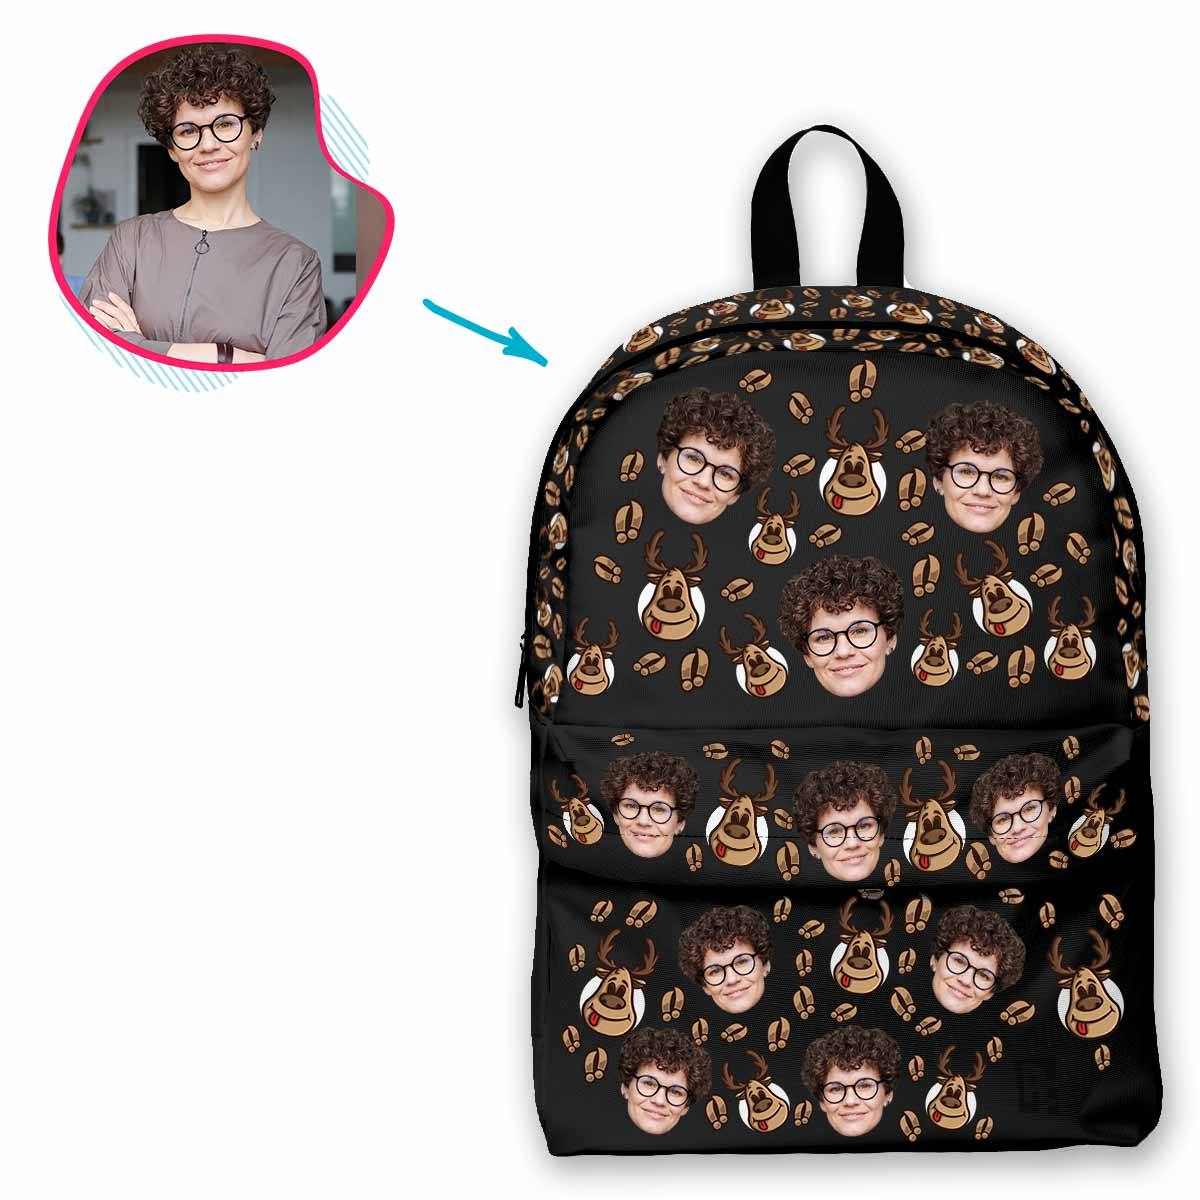 dark Deer Hunter classic backpack personalized with photo of face printed on it